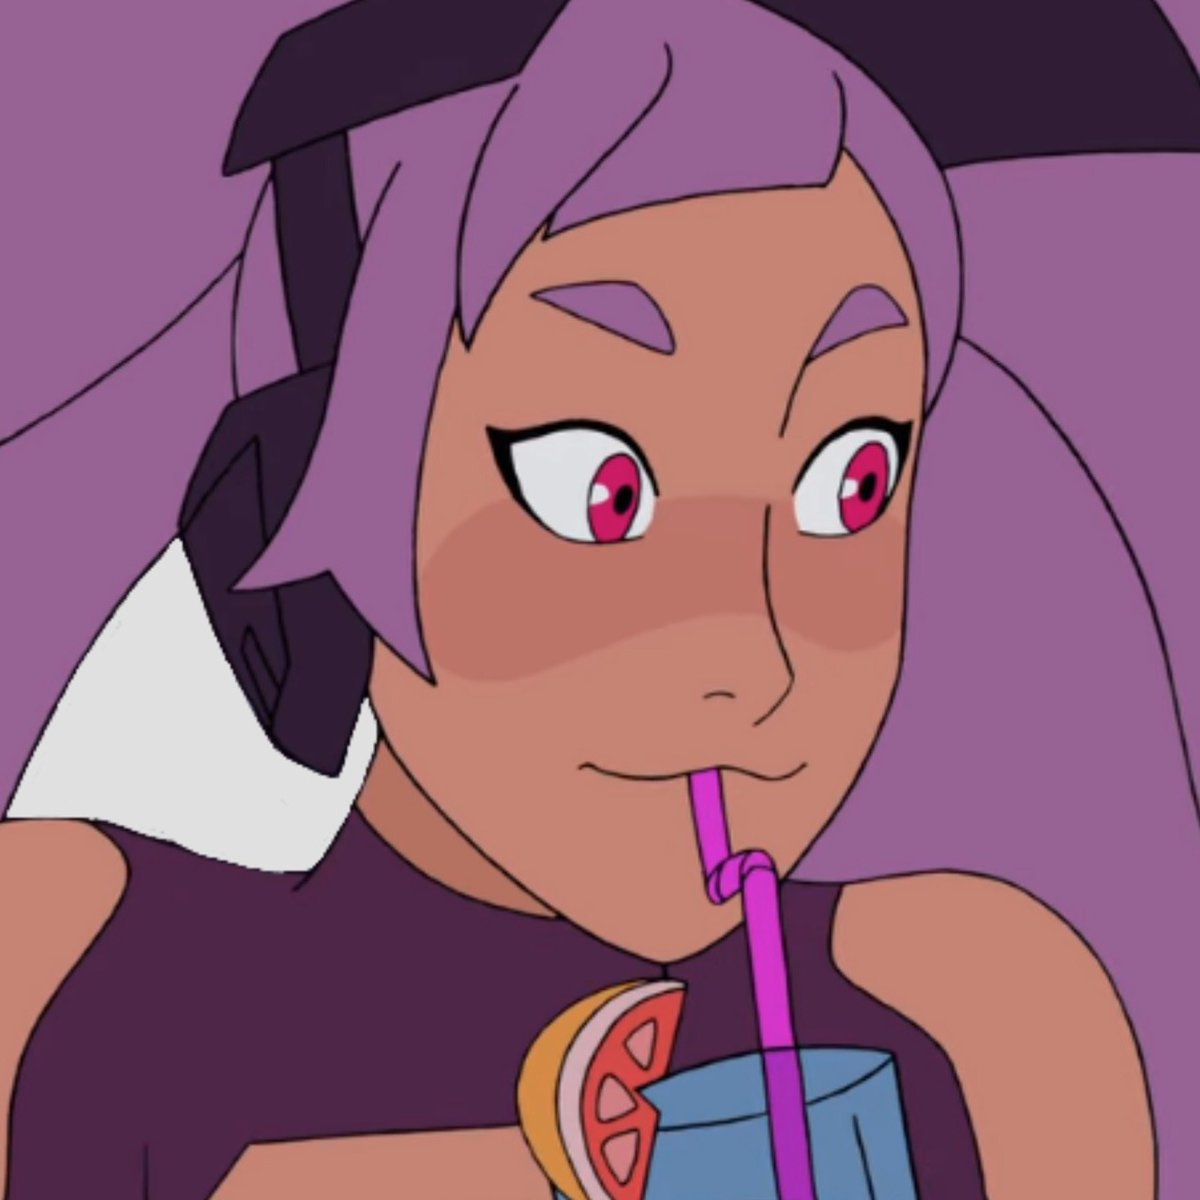 tl cleanse here's a thread of entrapta pics i have saved